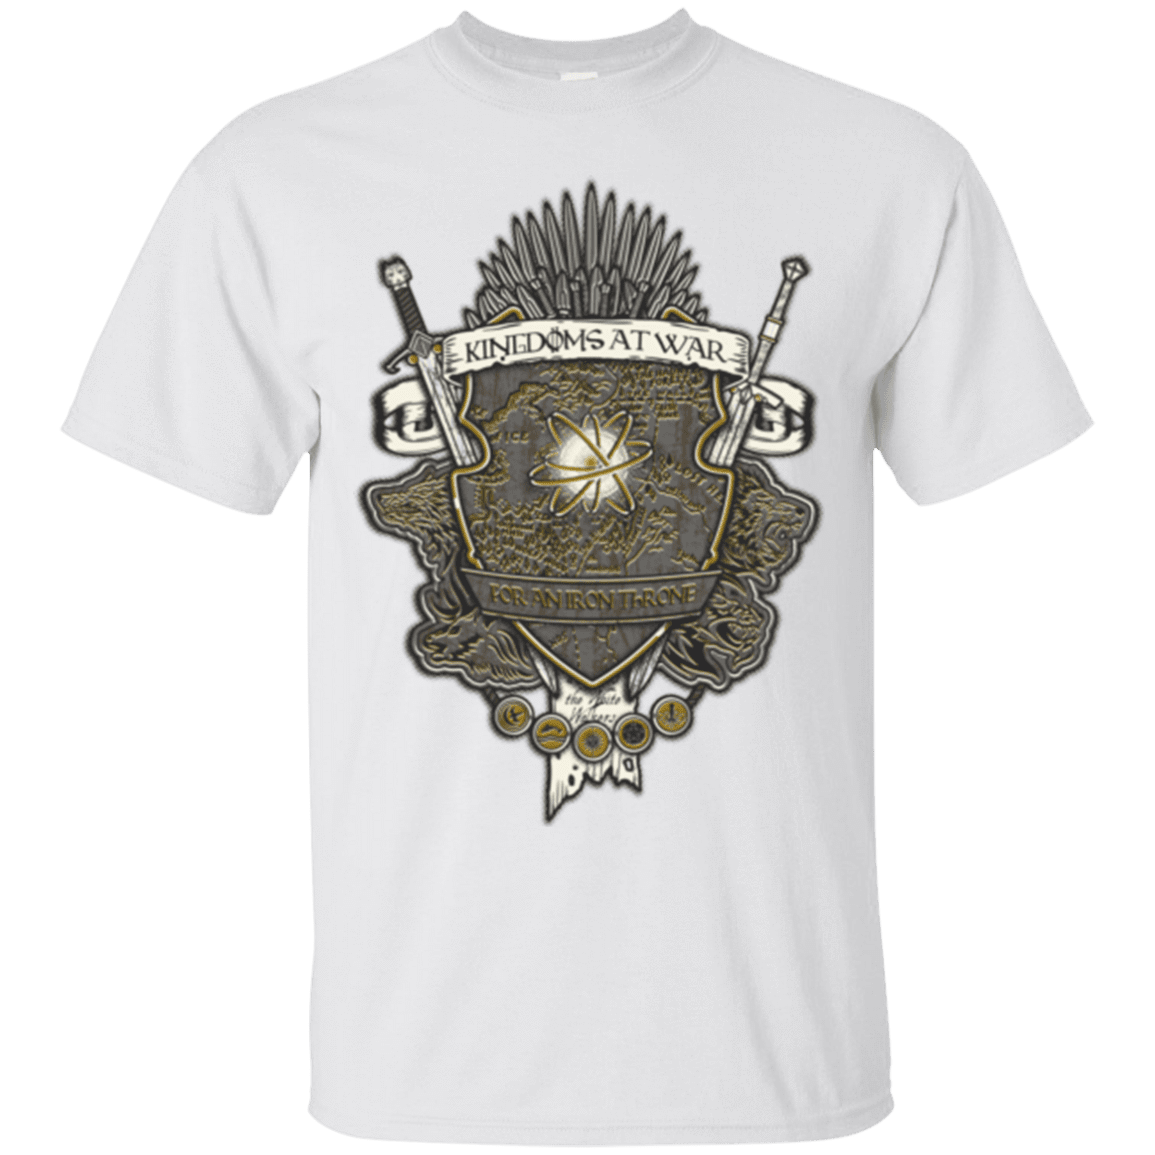 T-Shirts White / Small Crest of Thrones T-Shirt